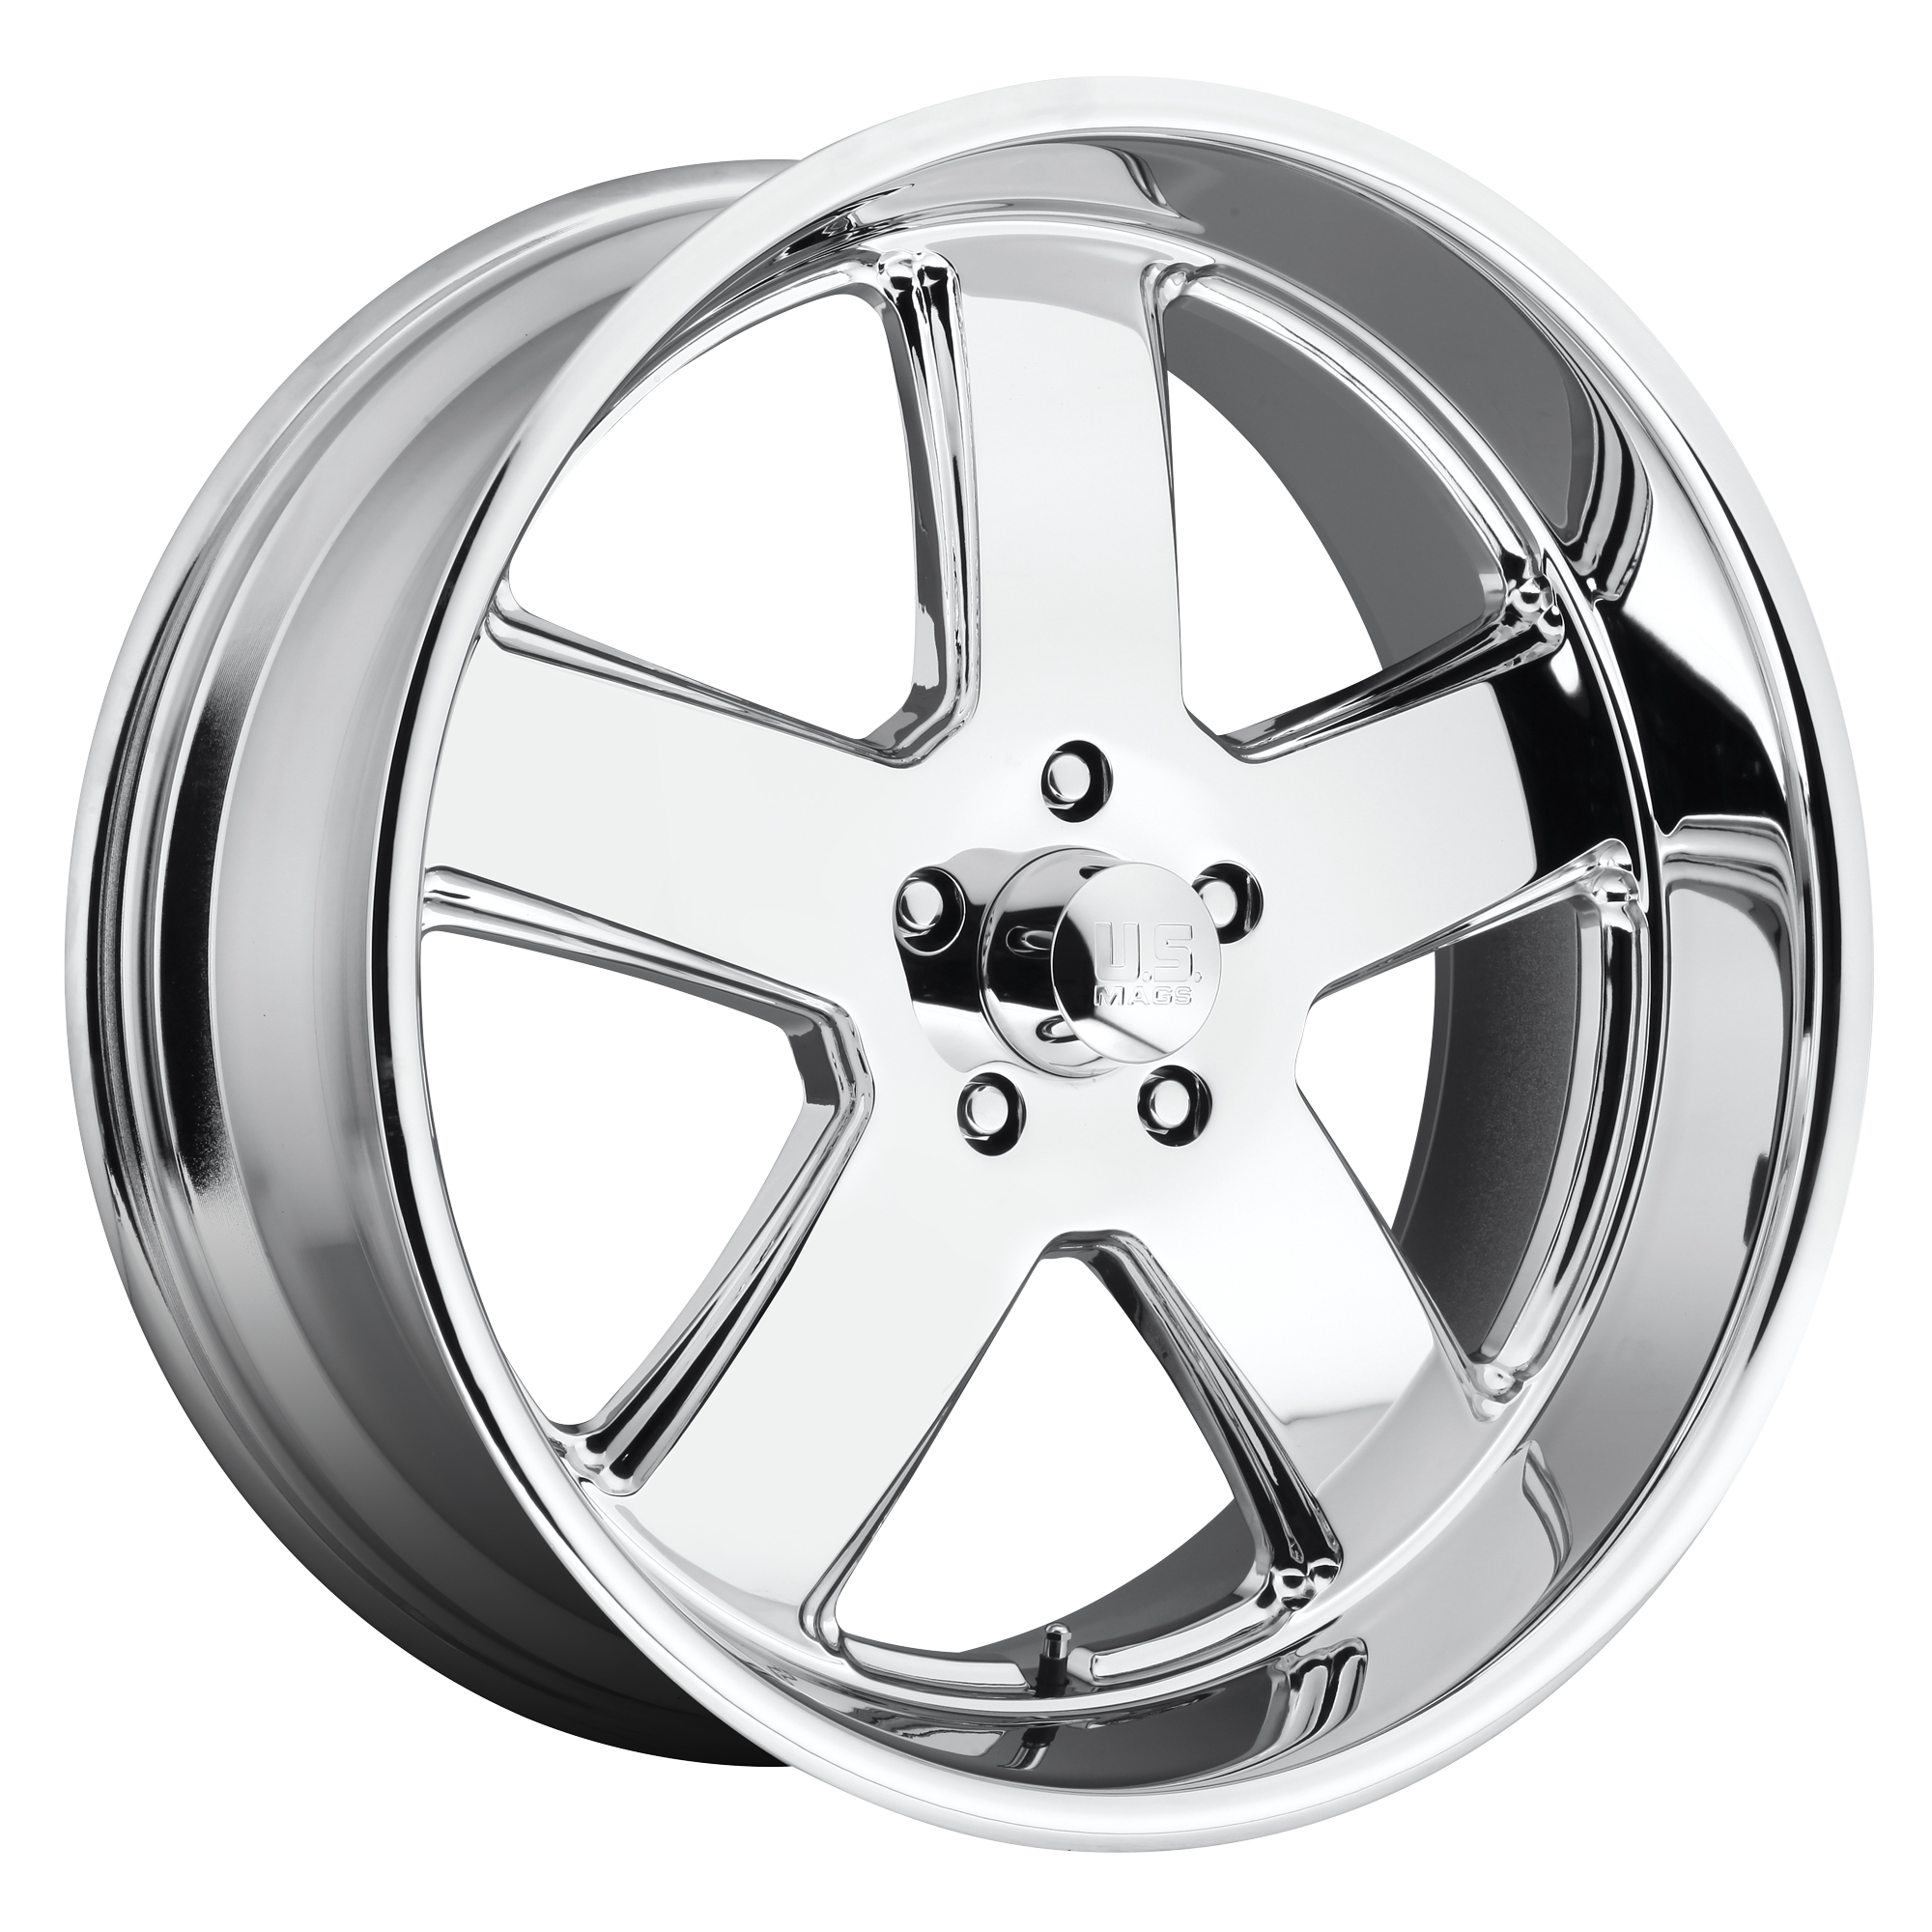 HUSTLER 20x8 5x127.00 CHROME PLATED (1 mm) - Tires and Engine Performance